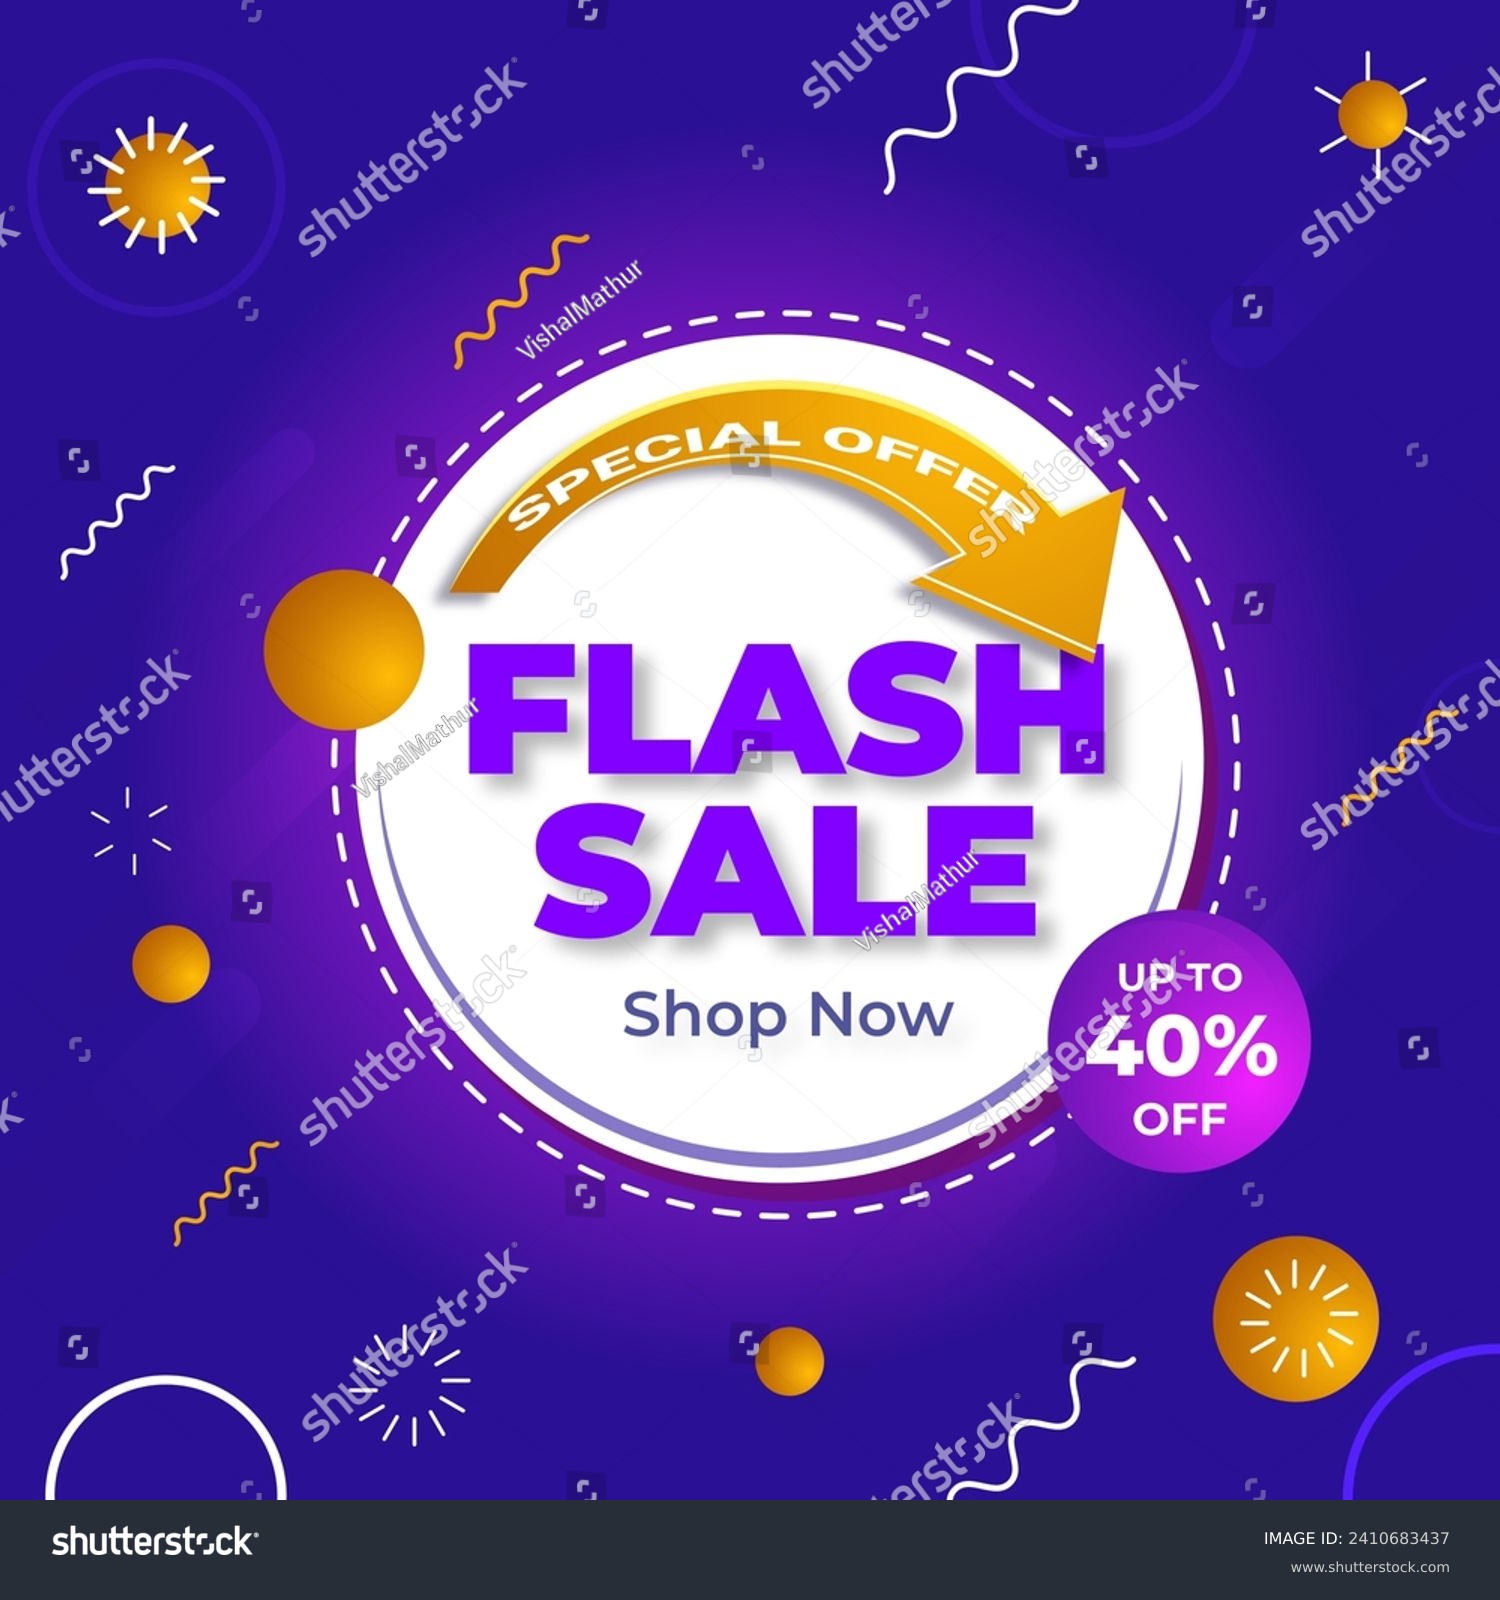 SVG of Flash Sale Gradient colorful sale background with discount up to 40%. Special Offer. Vector illustration. Shop Now. Get discount 40%. svg